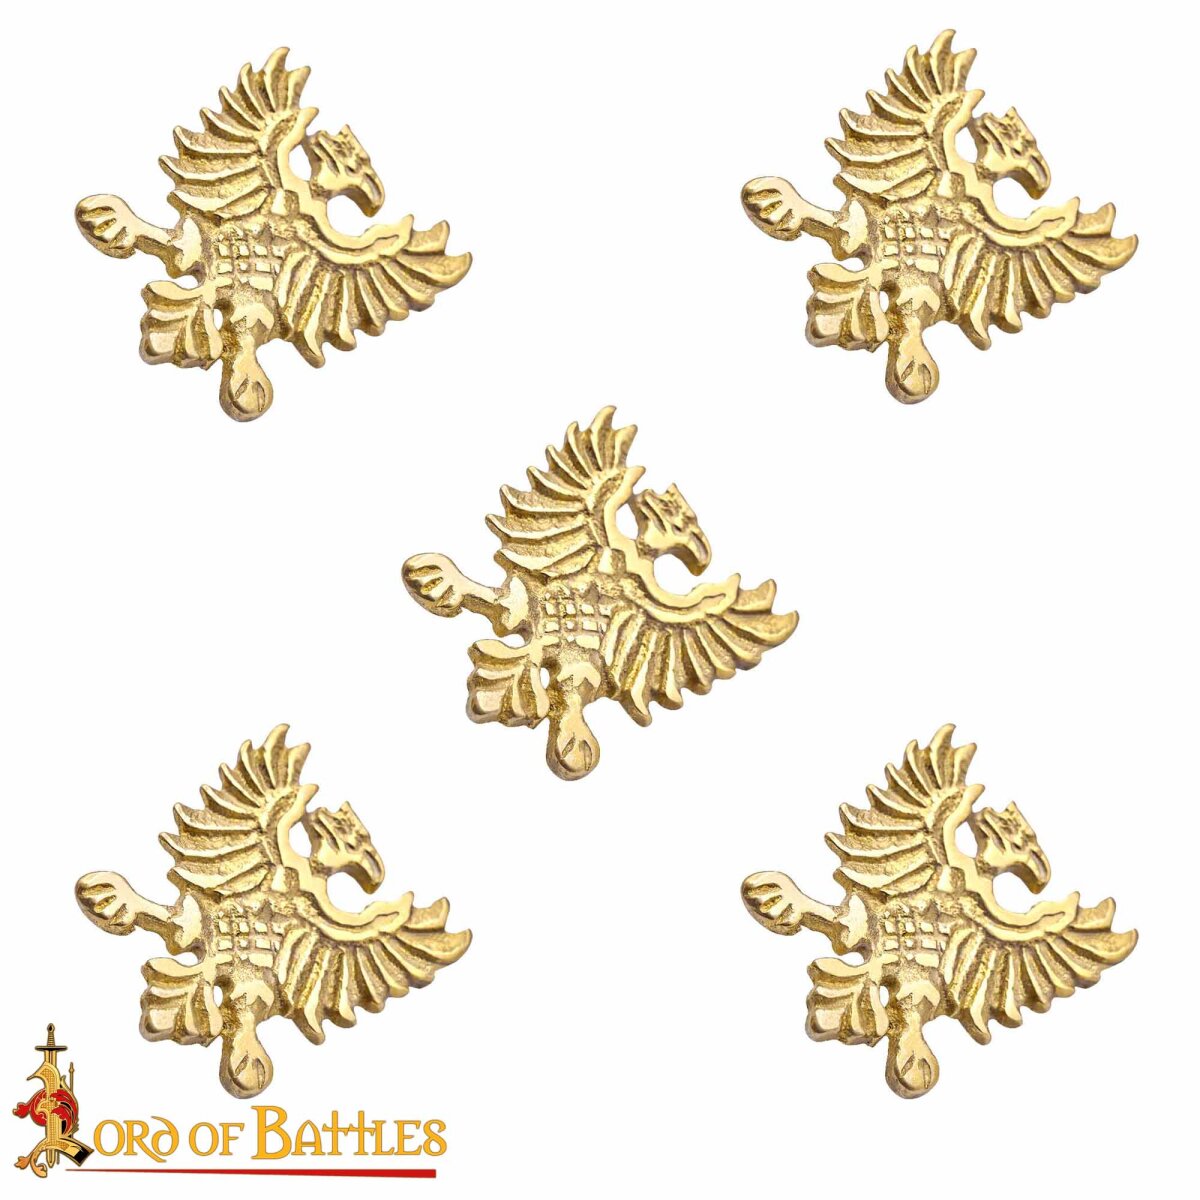 Heraldic Eagle Belt Studs or Conchos Pure Solid Brass Set...